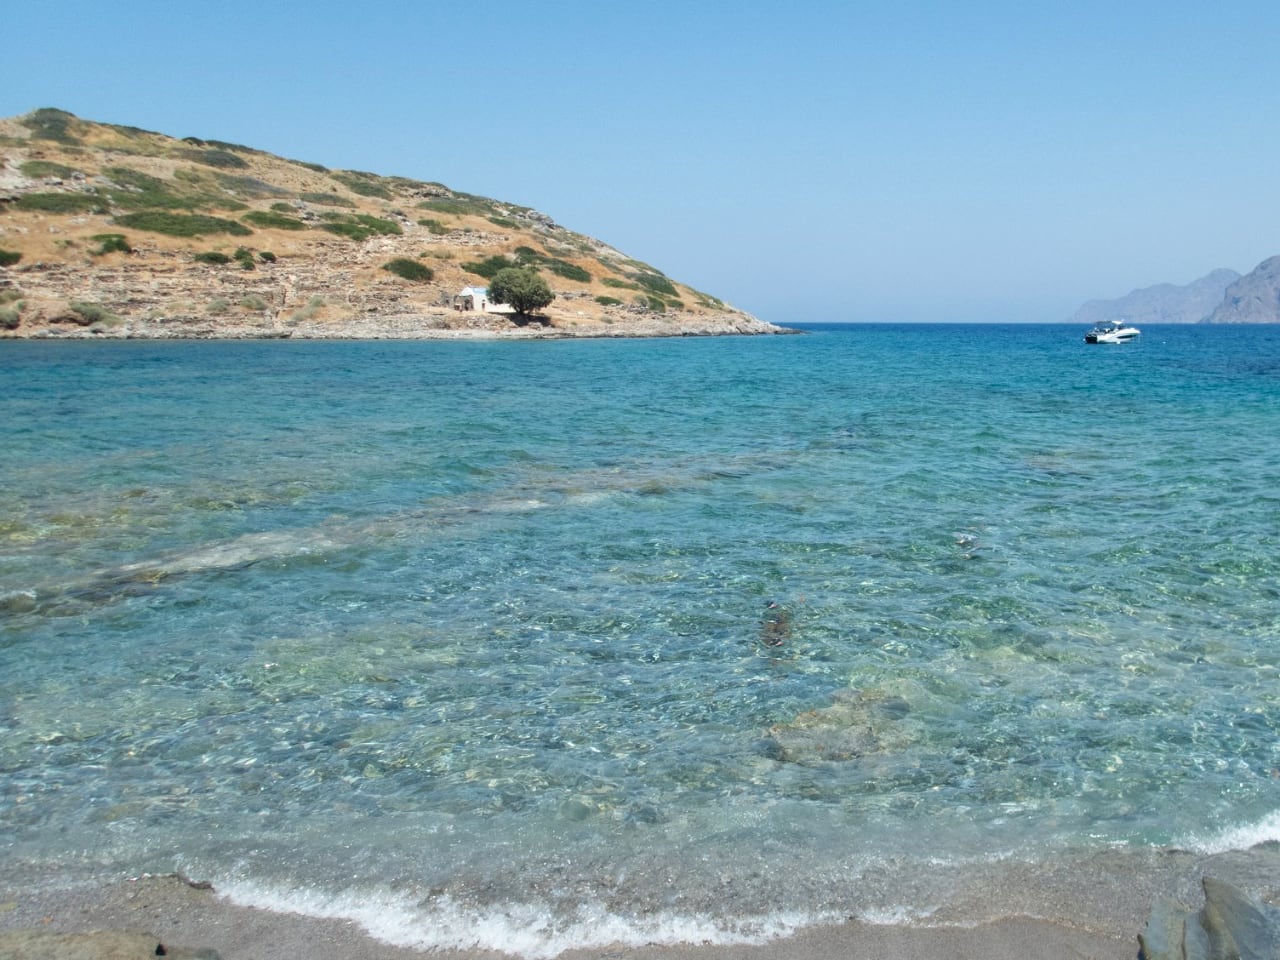 mochlos travel guide, mohlos travel guide, mochlos where to stay, mochlos villas apartments, mohlos ancient site, mohlos history, mochlos activities, things to do mochlos, crete travel mochlos, the crete you are looking for